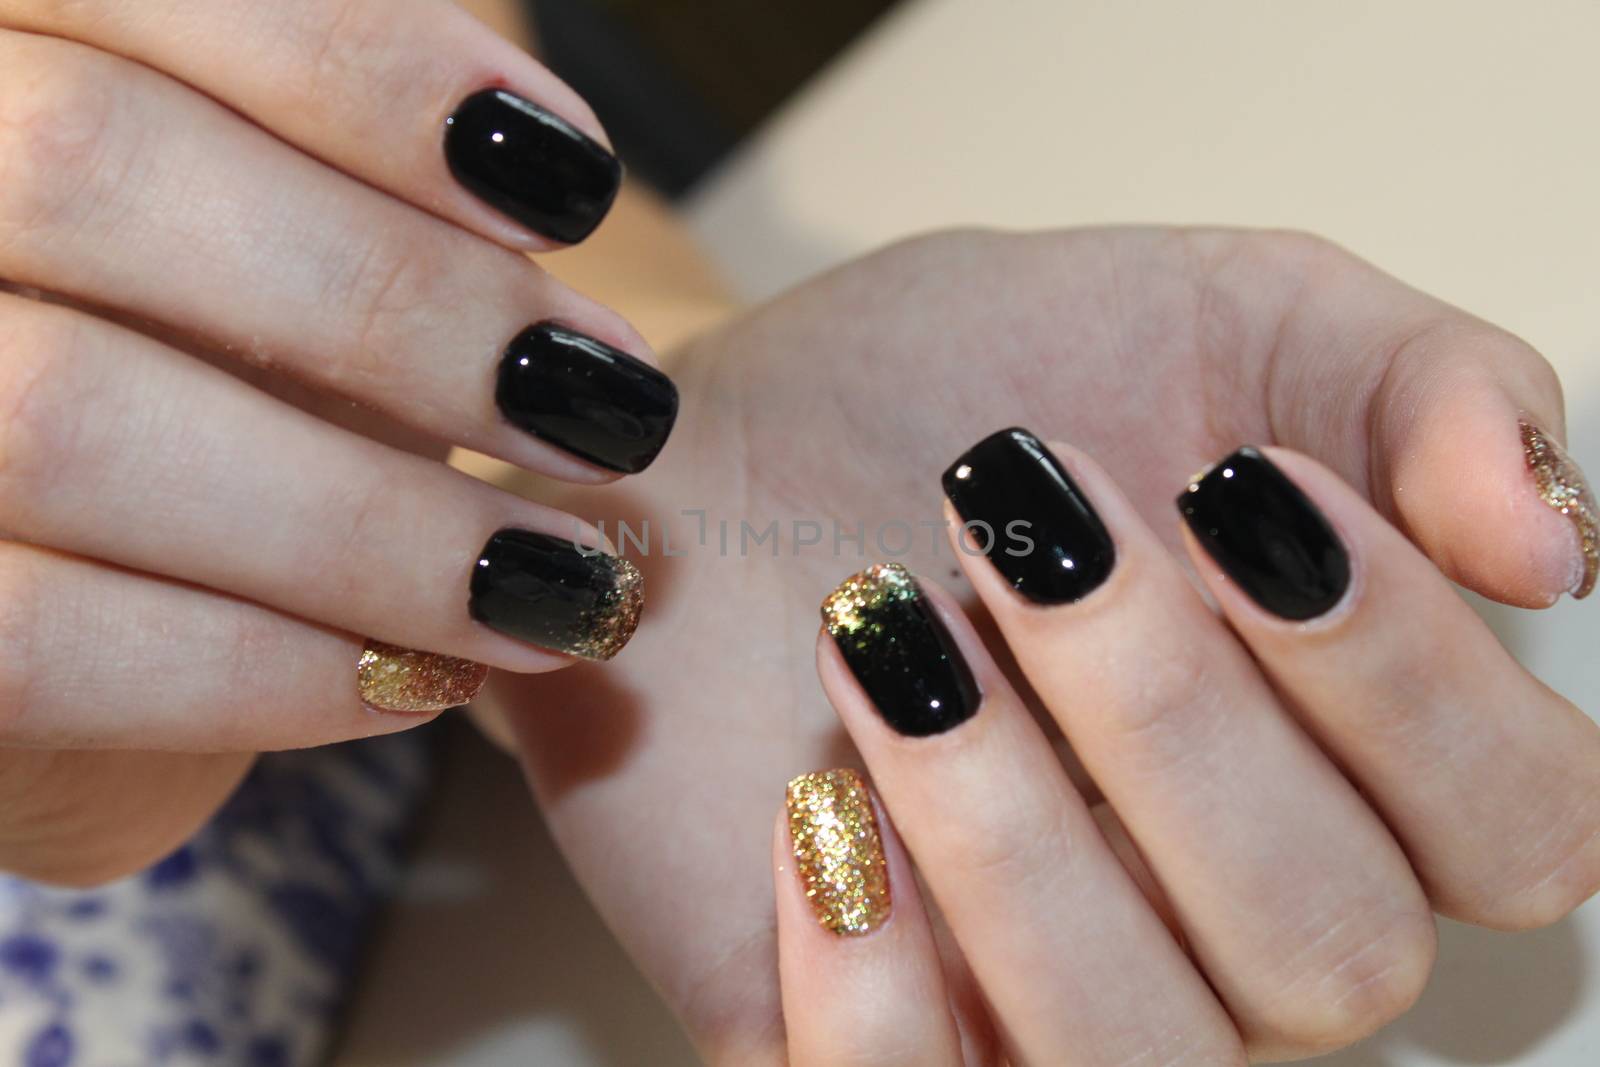 Evening manicure design in black and gold